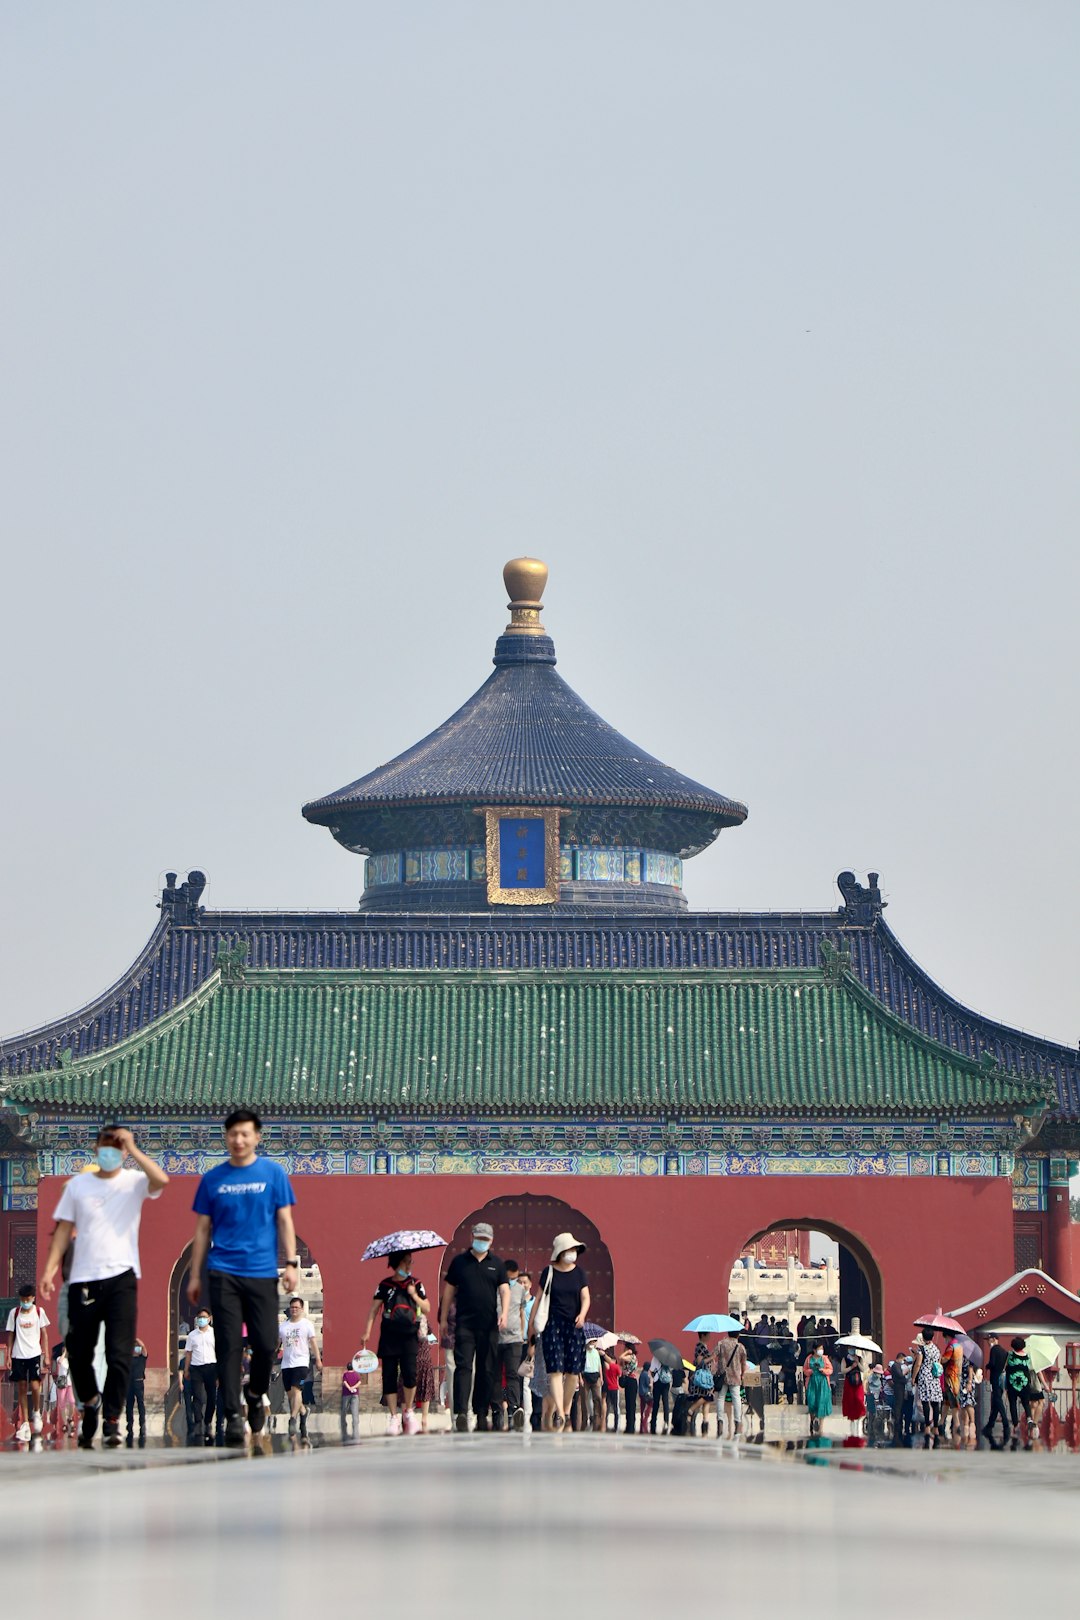 Travel Tips and Stories of Temple of Heaven in China